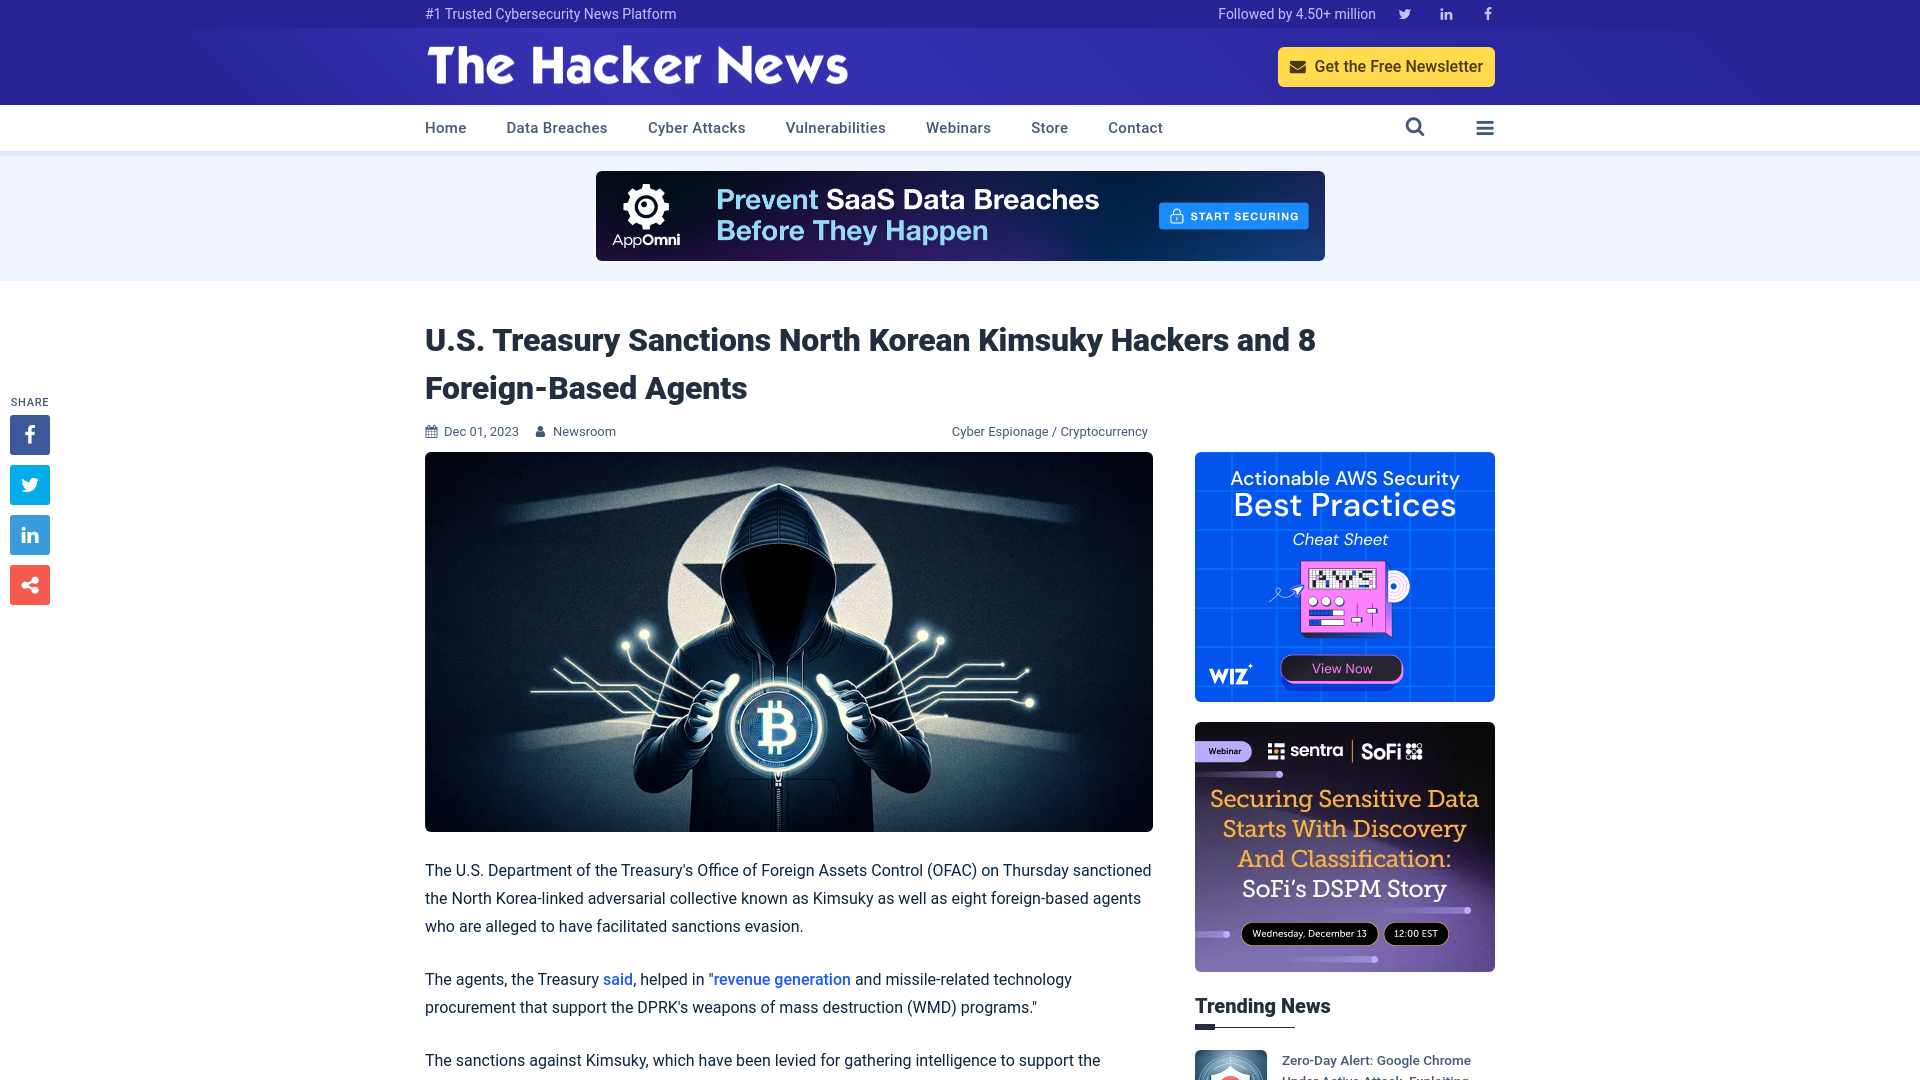 U.S. Treasury Sanctions North Korean Kimsuky Hackers and 8 Foreign-Based Agents